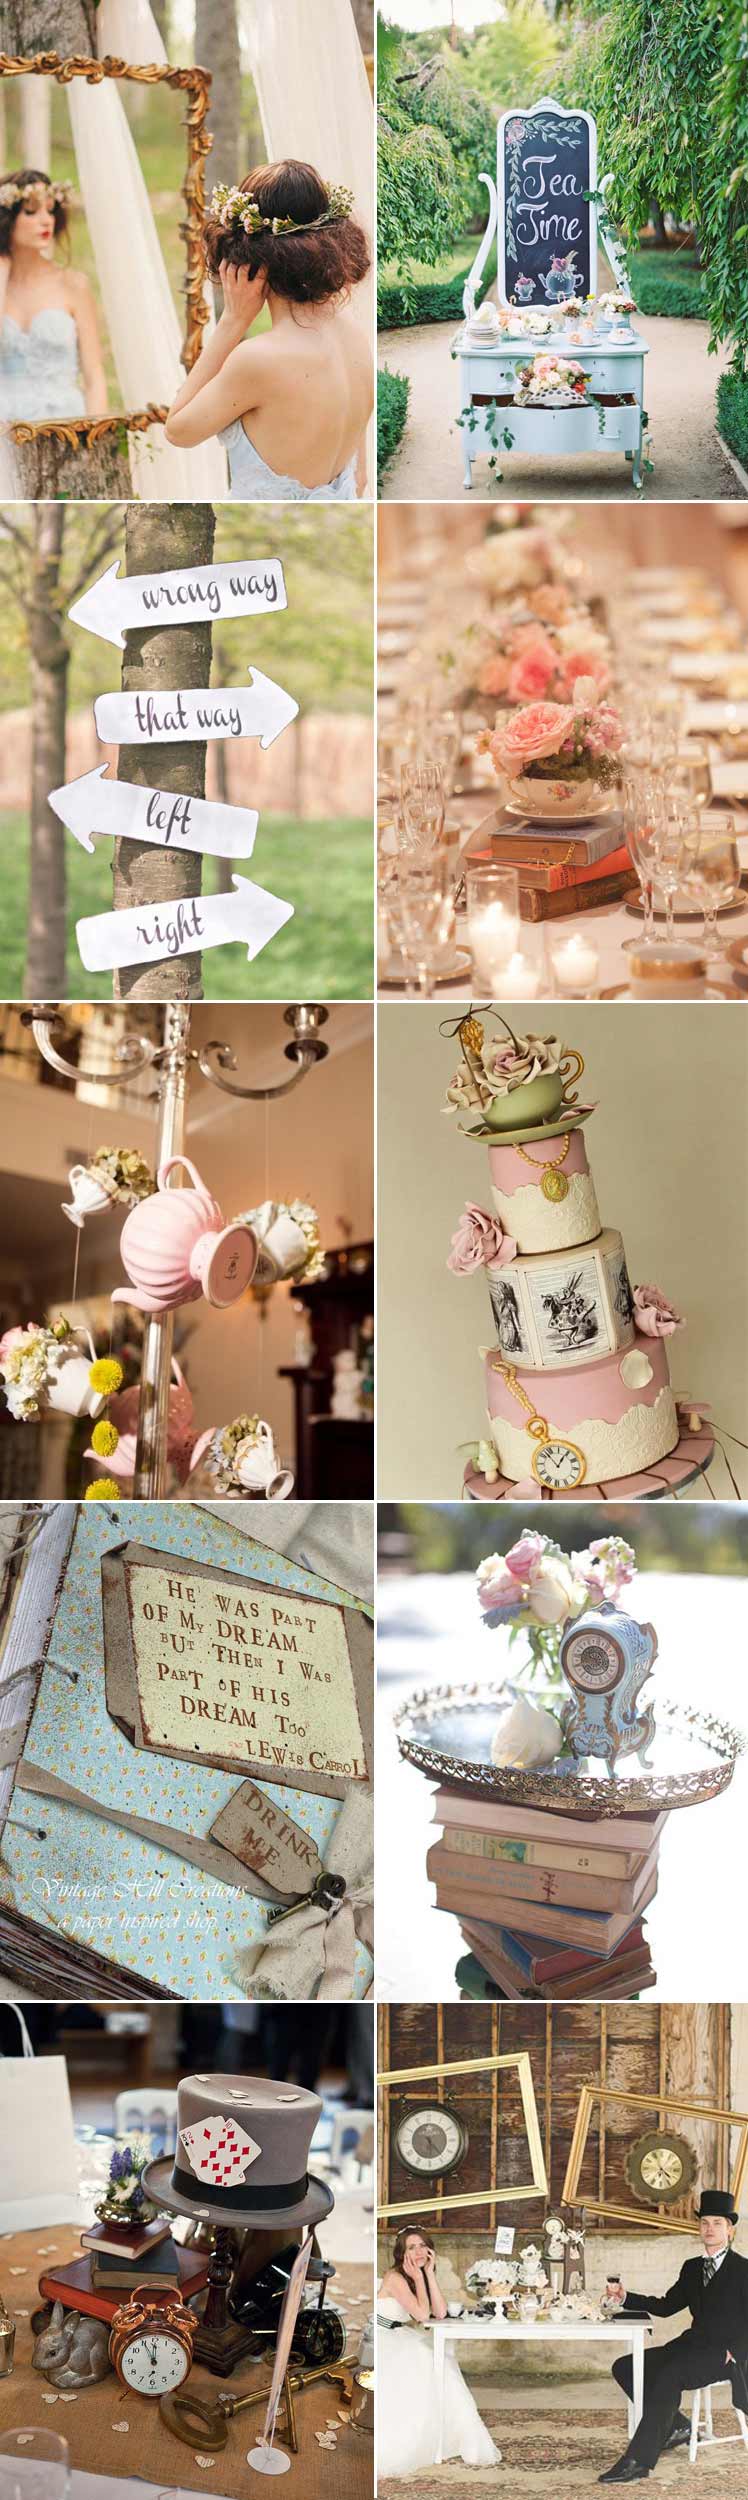 Inspiration for an Alice in Wonderland wedding day